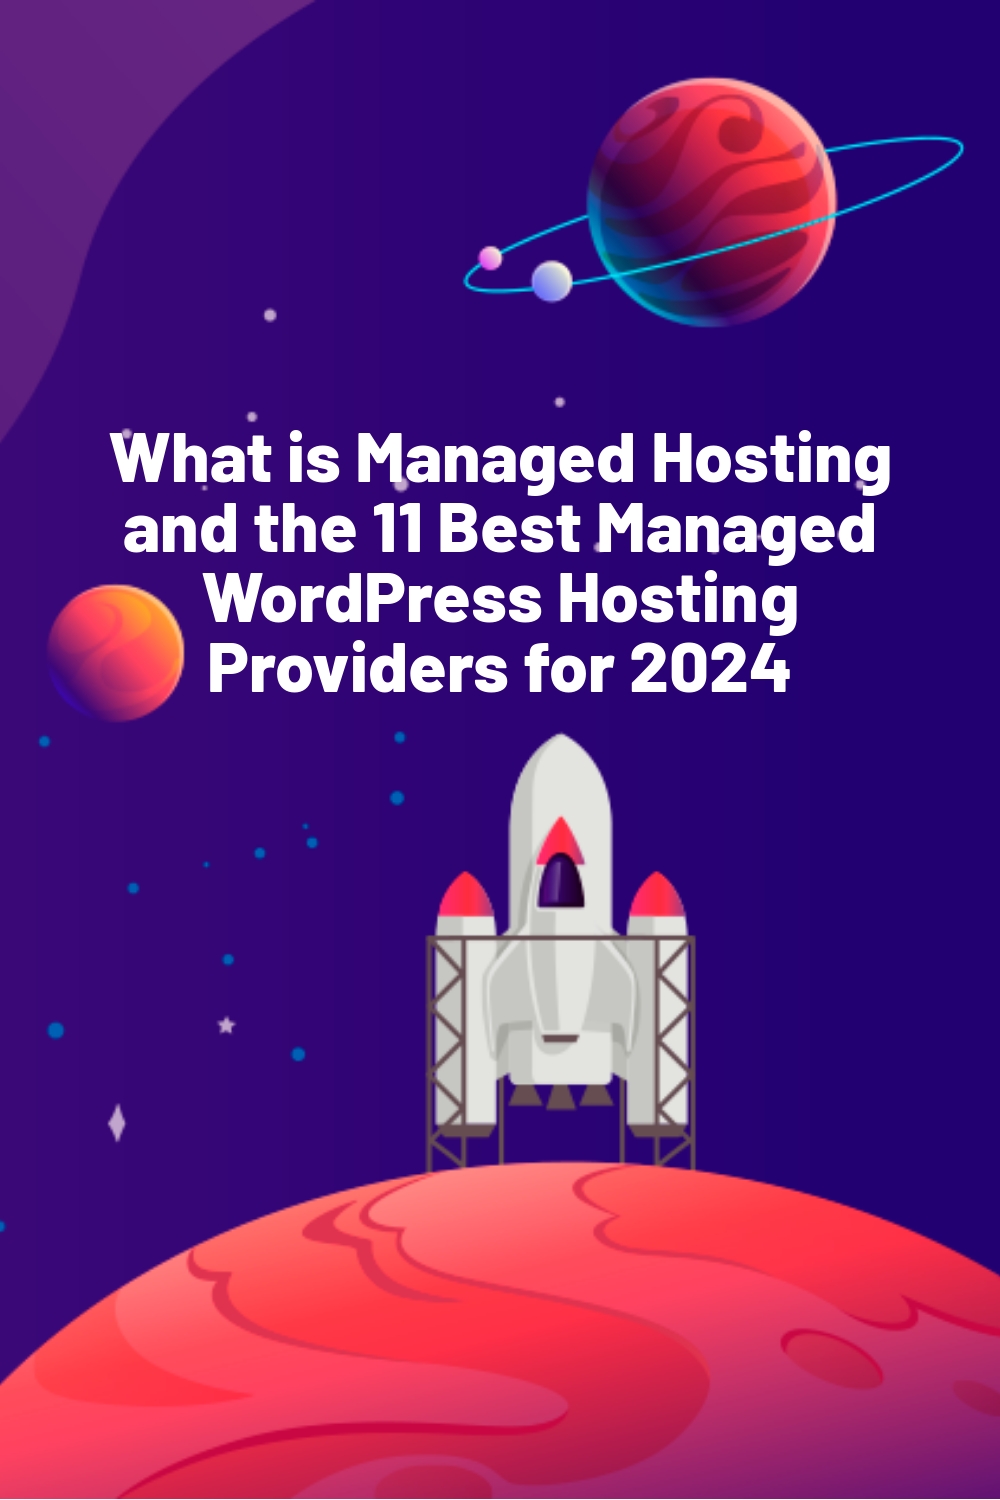 What is Managed Hosting and the 11 Best Managed WordPress Hosting Providers for 2024